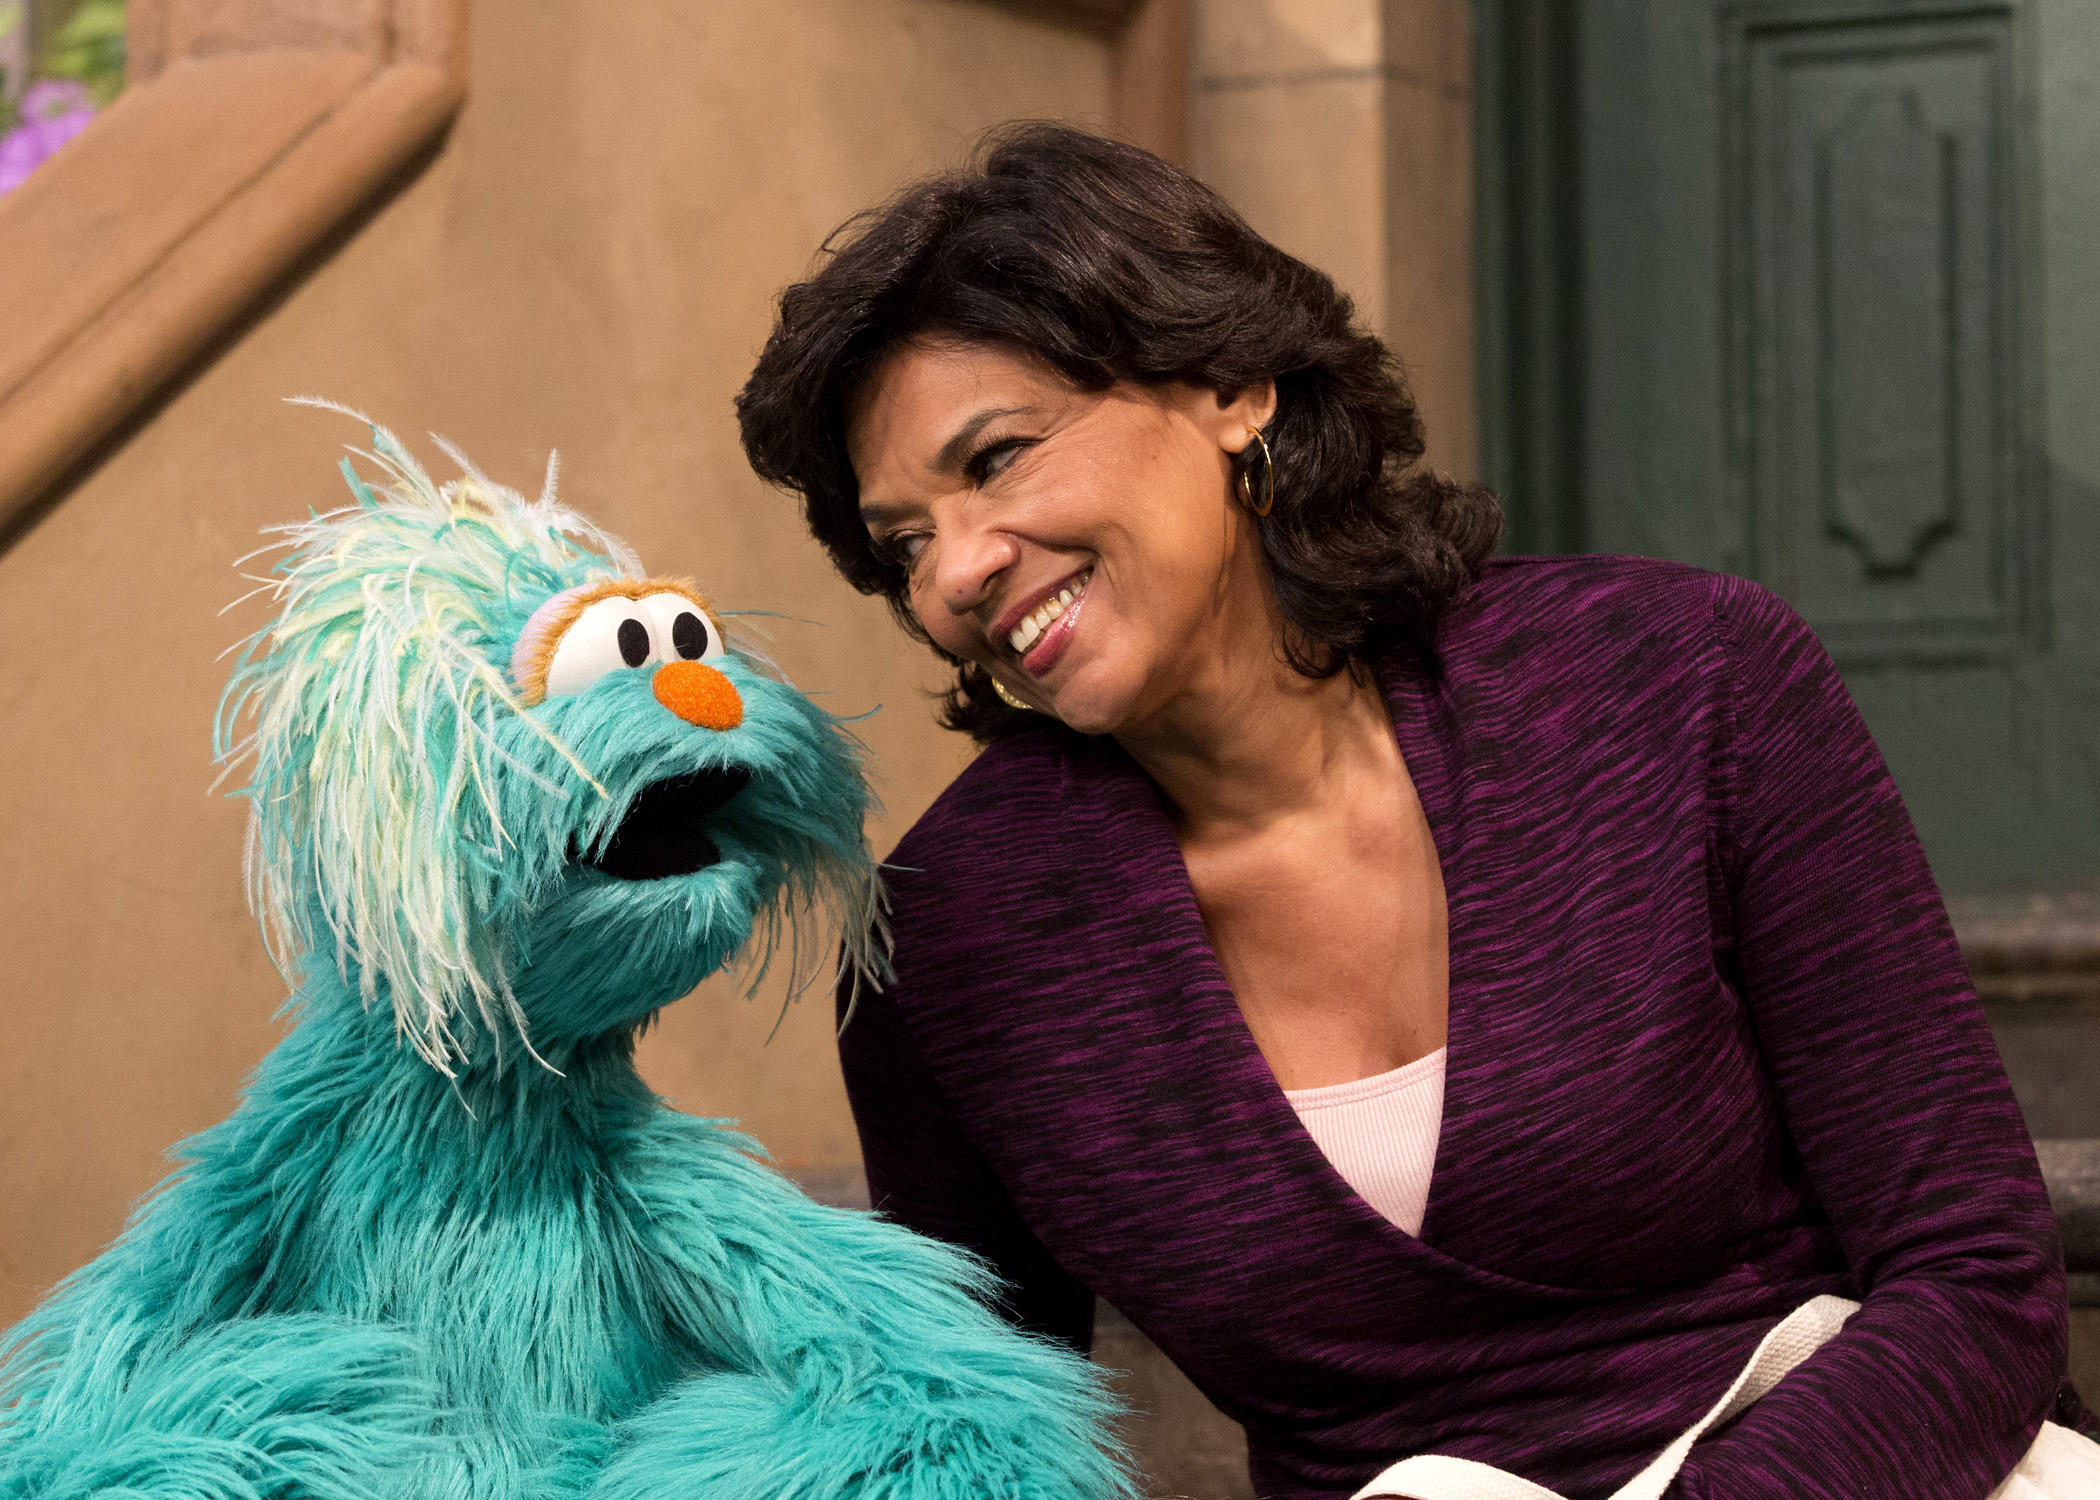 Rosita, the bilingual Mexican Muppet, and her human Puerto Rican friend, Maria Rodriguez. All rights reserved to The Jim Henson Company/Muppets Incorporated. 